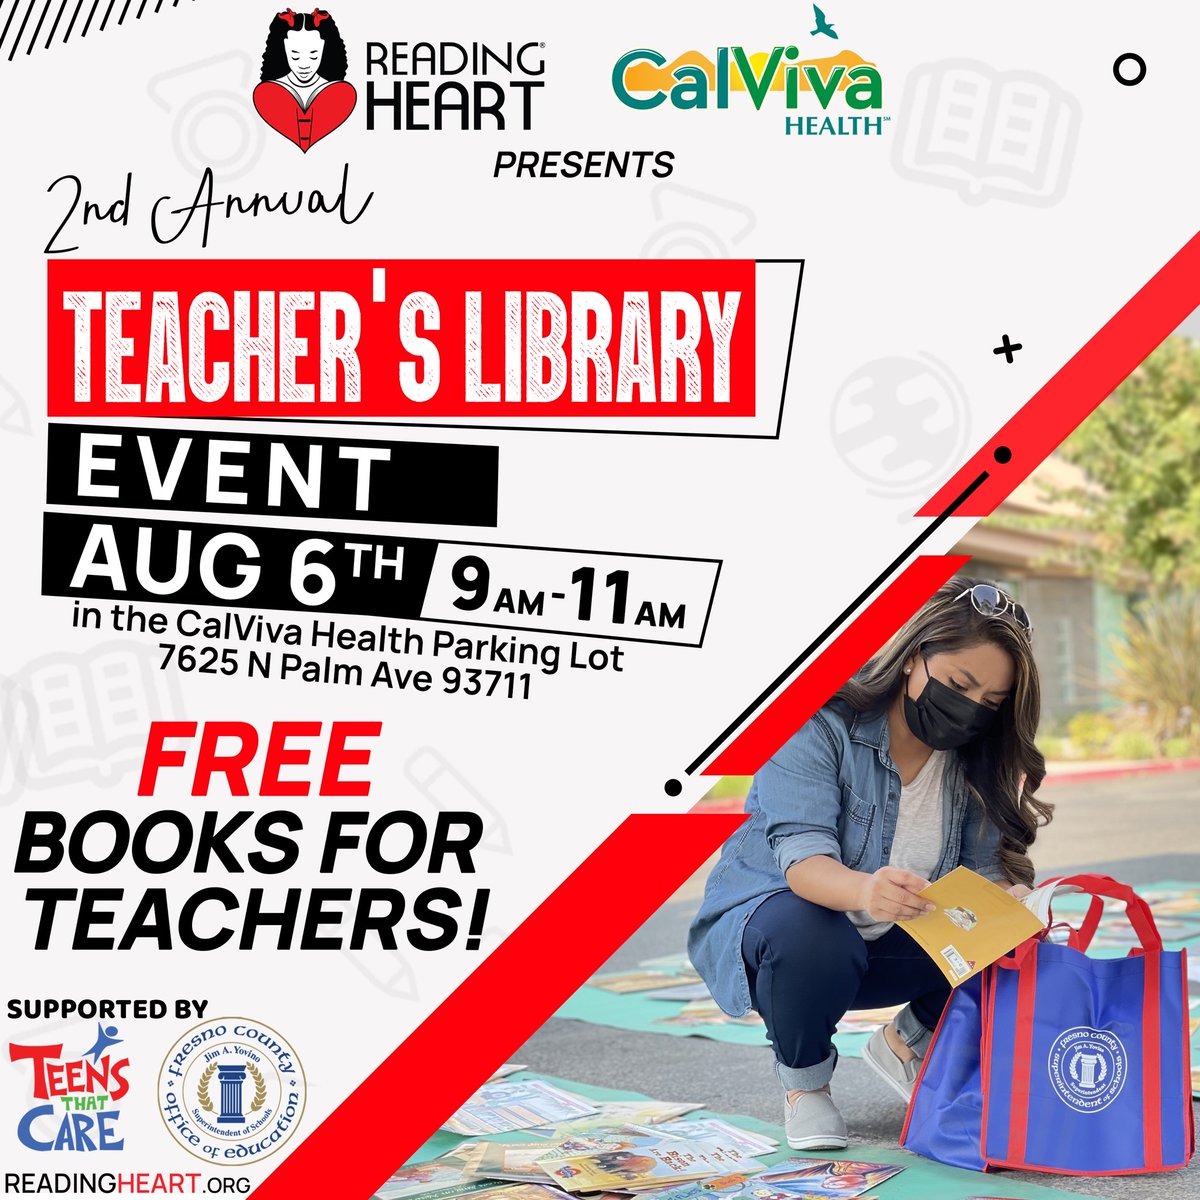 Teachers, it is time to stack your classroom with free books! See the event flyer below for details and sign up today at bit.ly/3oPHvQG